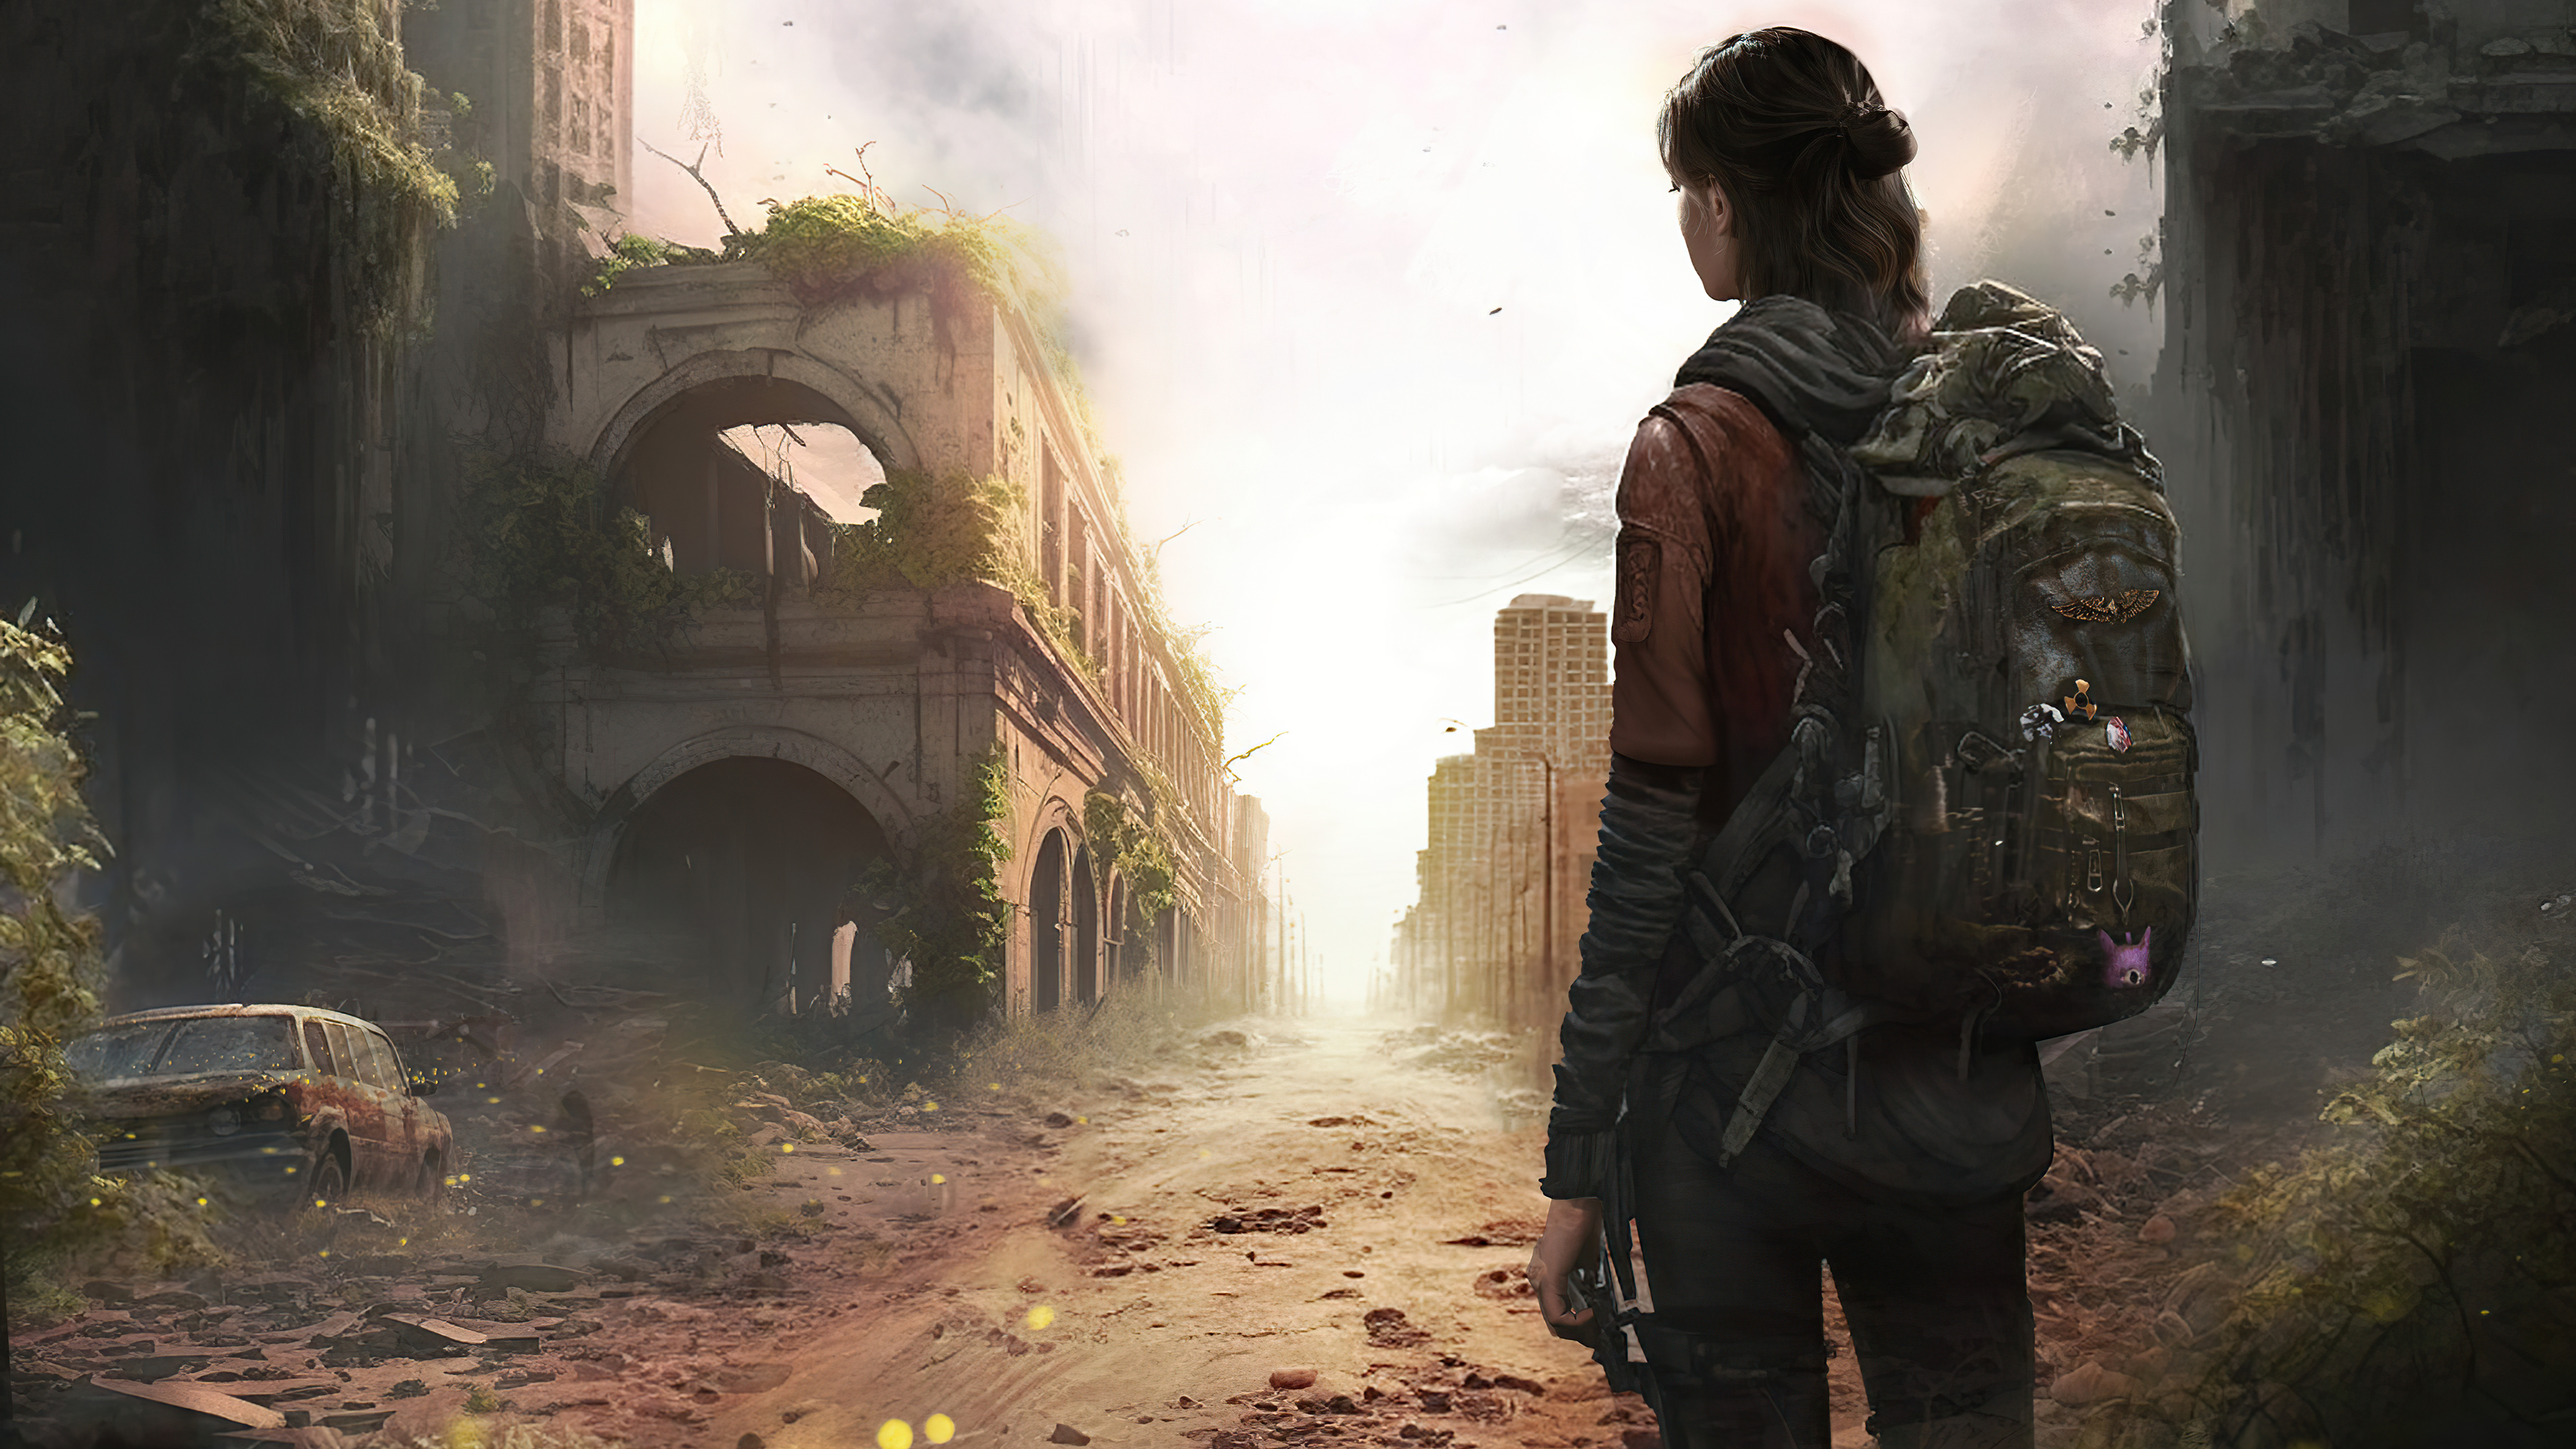 Wallpaper : The Last of Us 2, The Last of Us, Ellie 1920x1080 - shenzehan -  1940769 - HD Wallpapers - WallHere